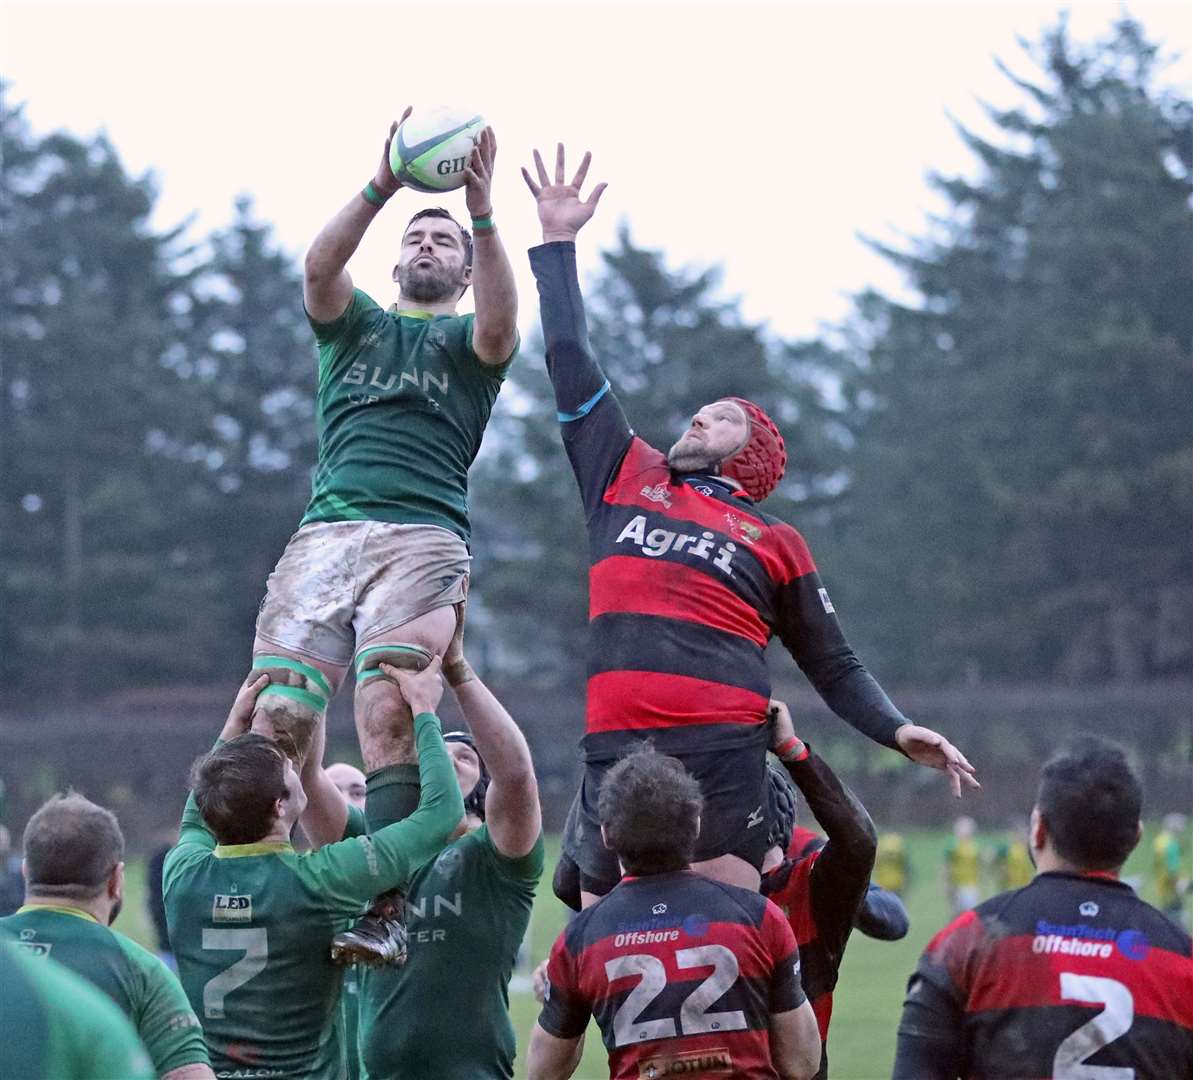 Caithness beat Aberdeenshire 26-14 at Millbank in December, but home games for the Greens have been few and far between this season. Picture: James Gunn